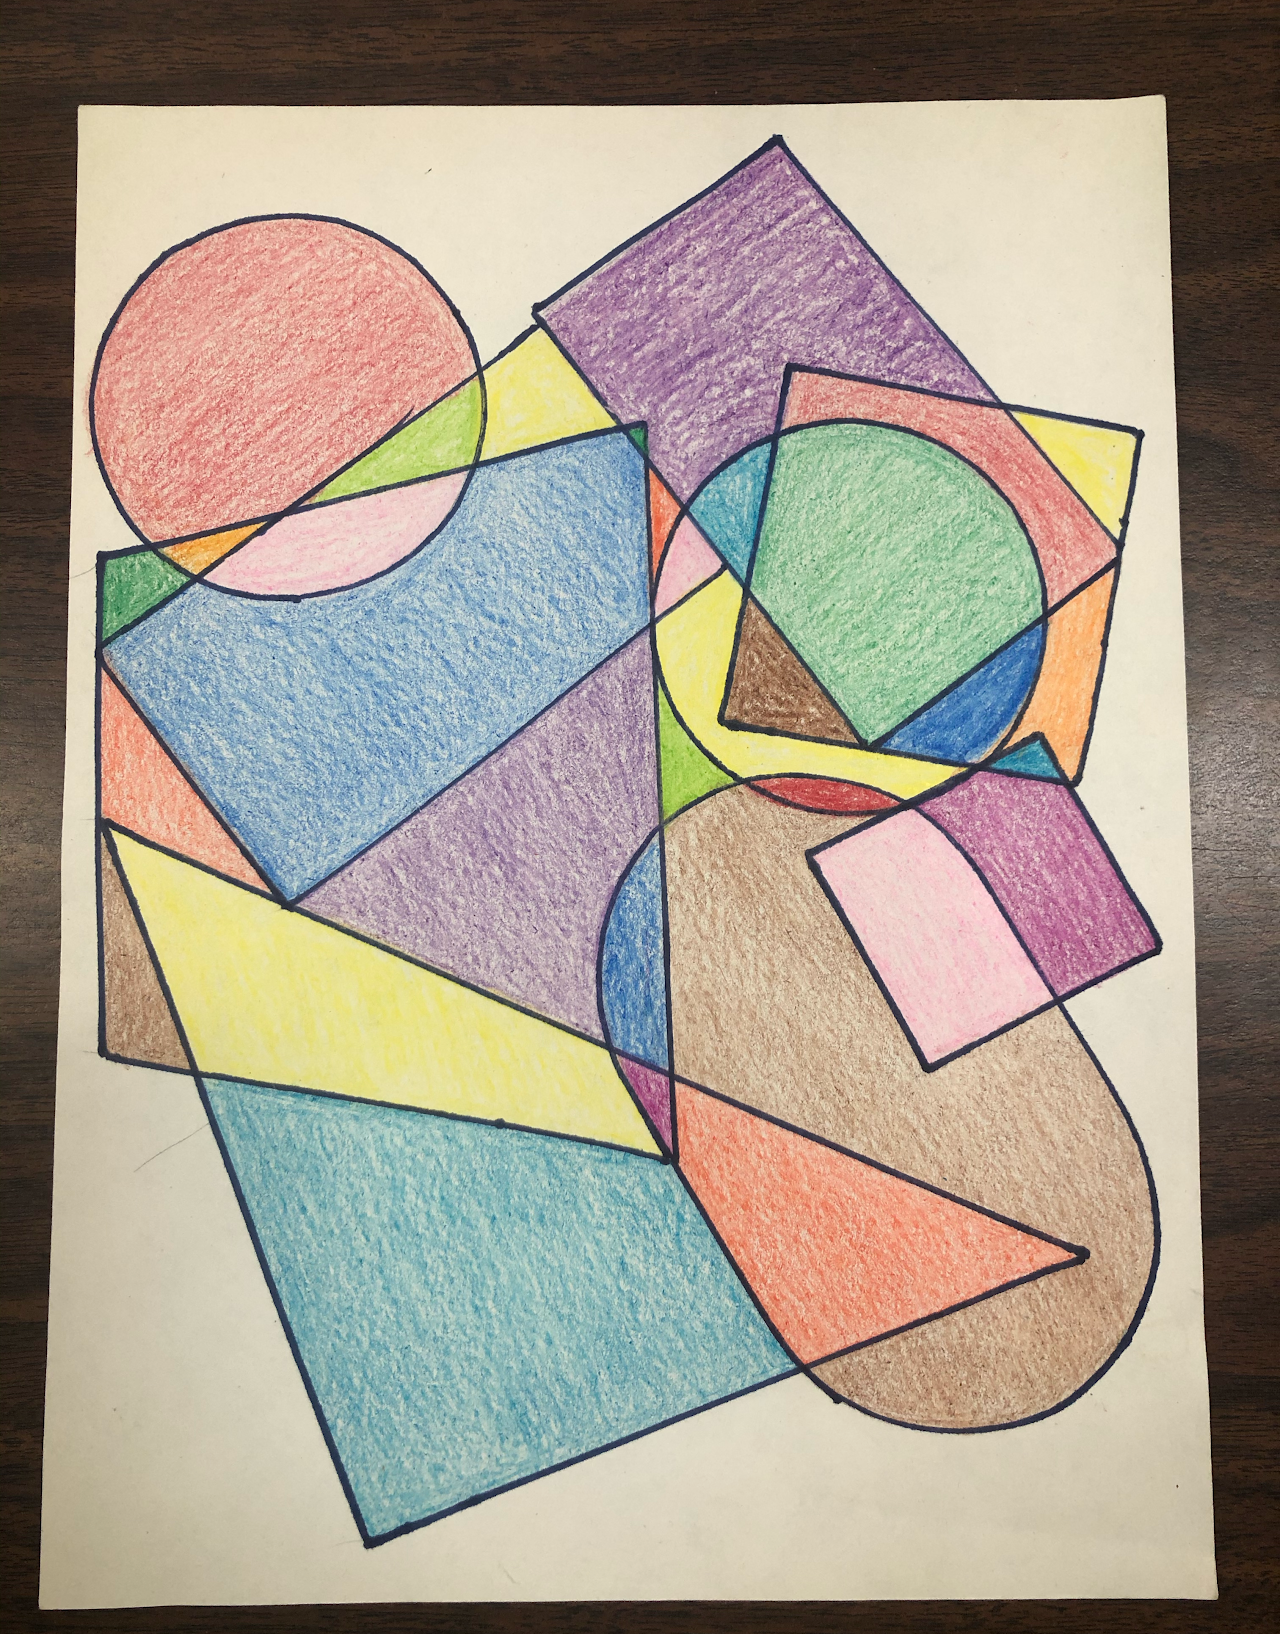 Overlapping shapes drawing